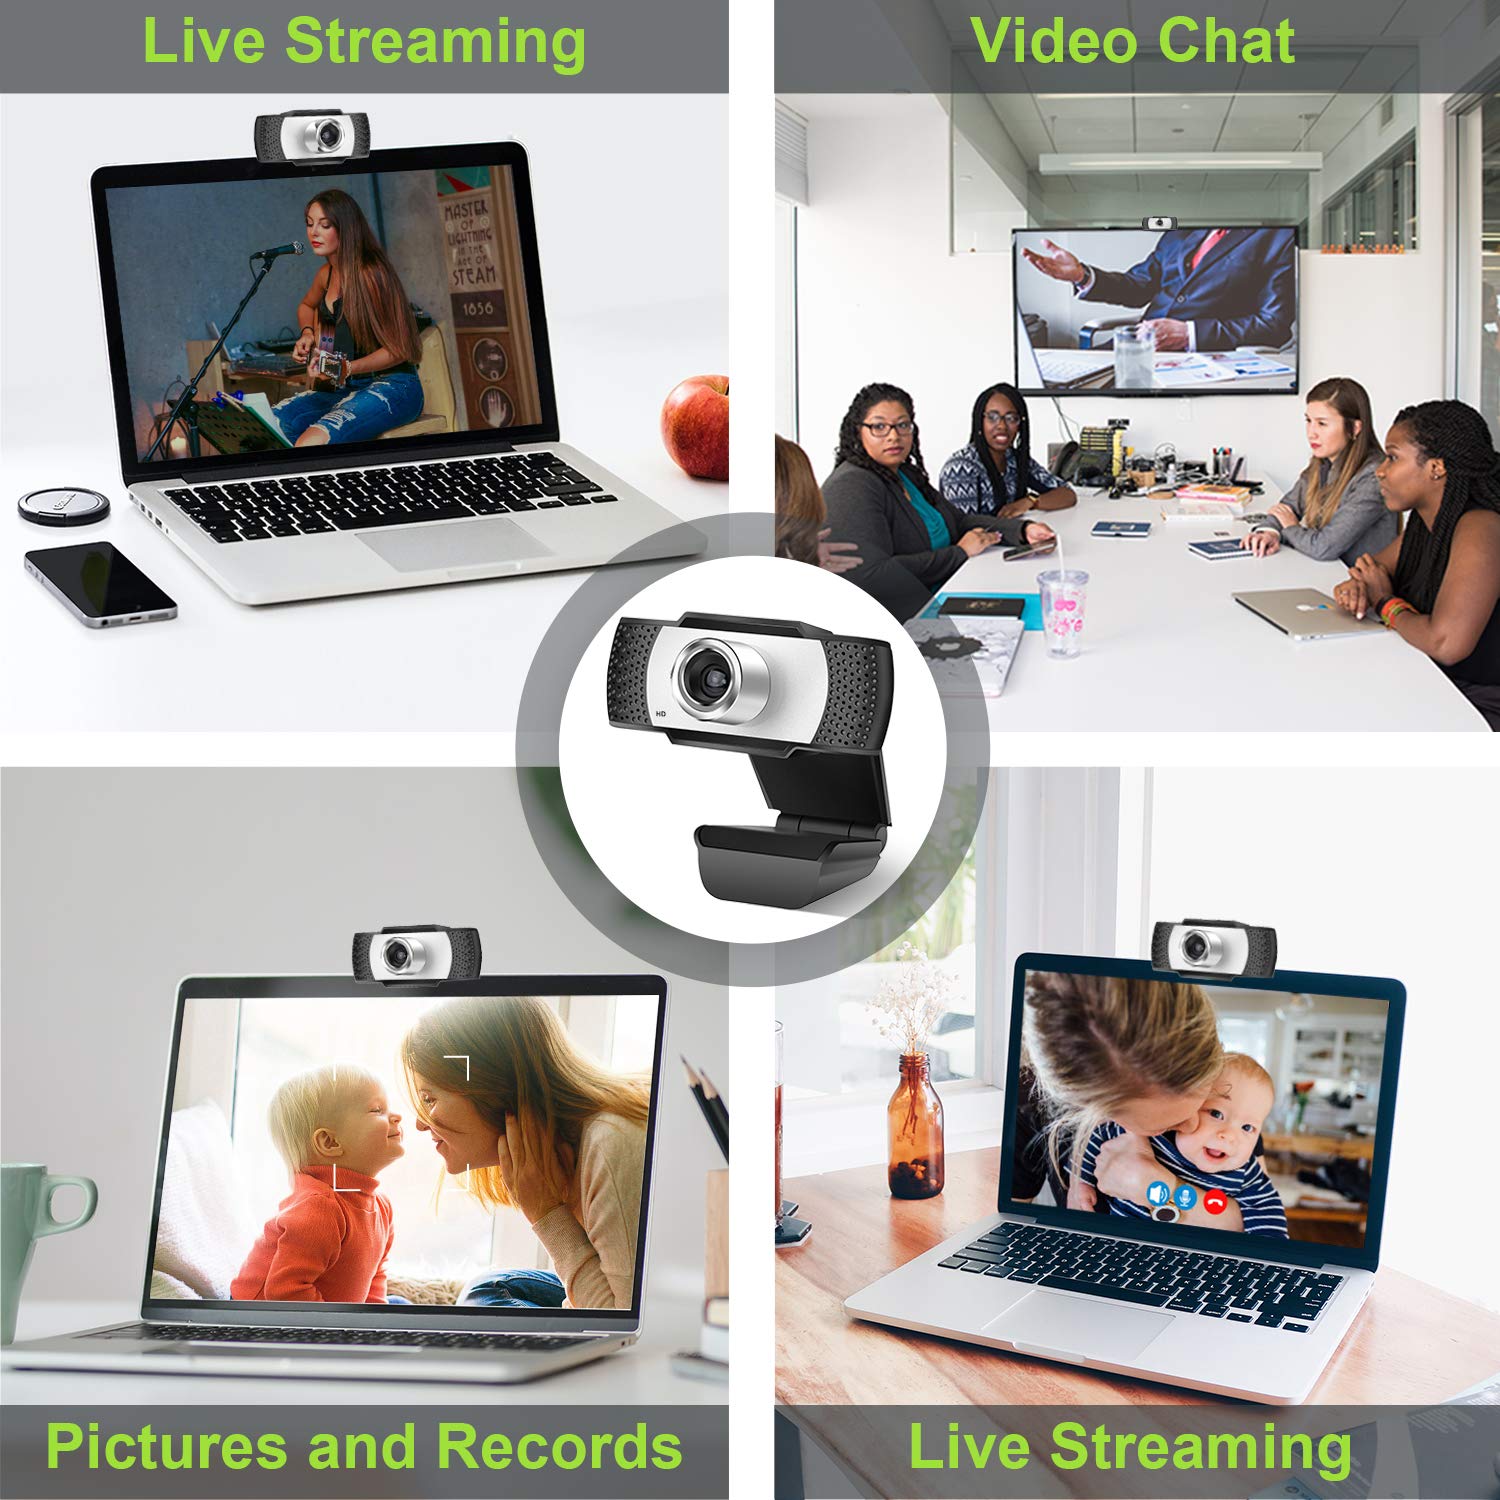 Full HD Webcam 1080P with Microphone,120 Degrees Wide Angle Business Webcams Streaming USB Web Camera - W302 Computer Camera for Video Calling, Recording, Conferencing, Teaching, OBS, PC Laptop